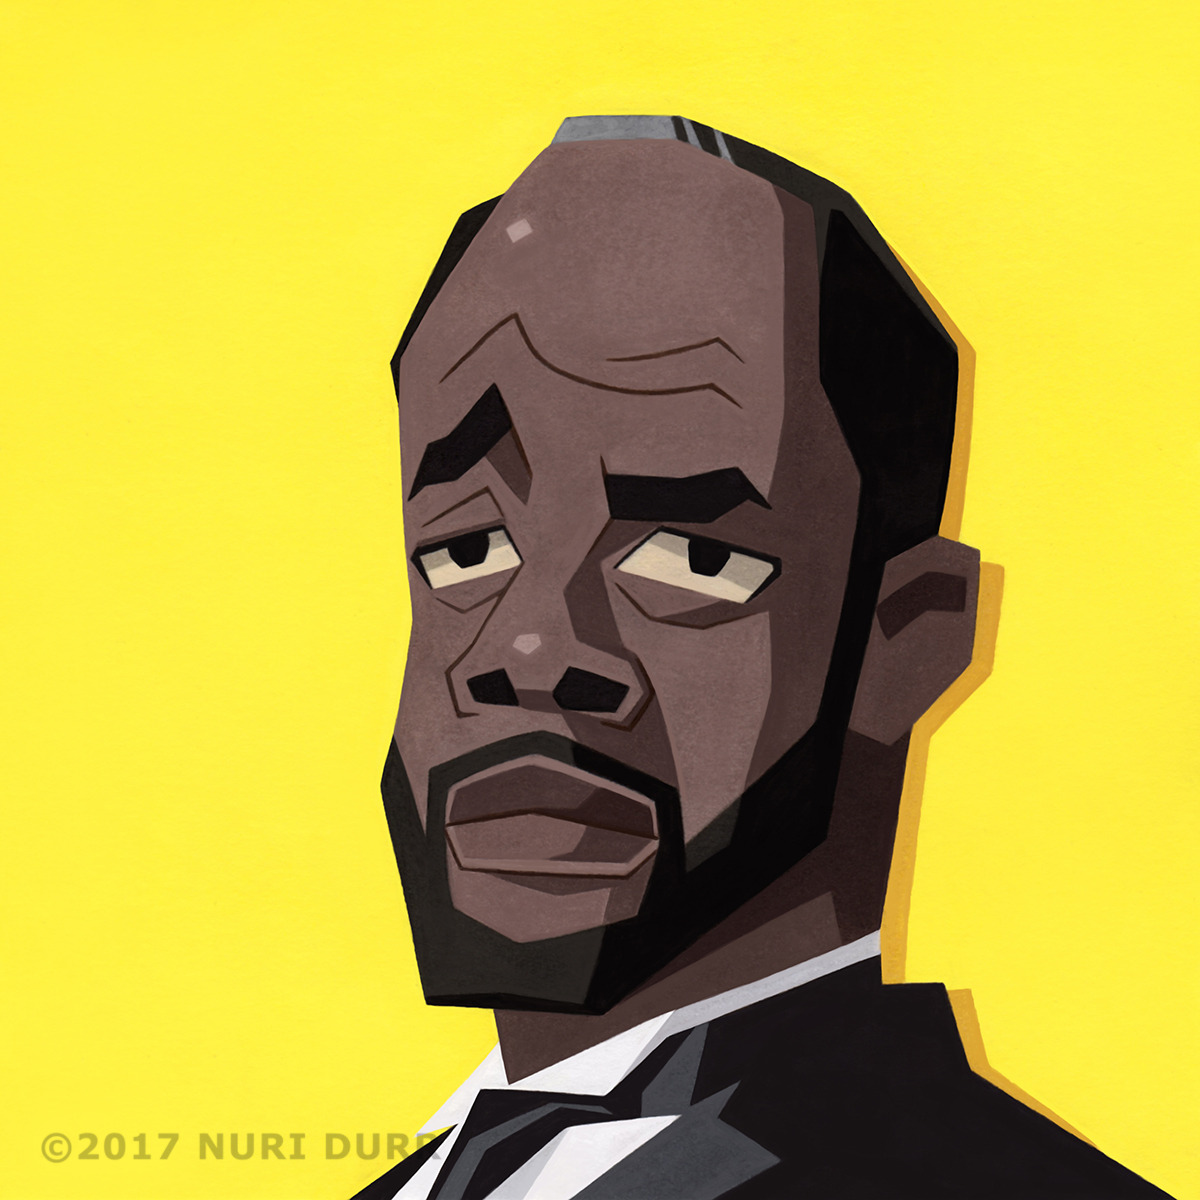 blenderknightsfw: nuridurr:  I did as series of pieces inspired by The Fresh Prince